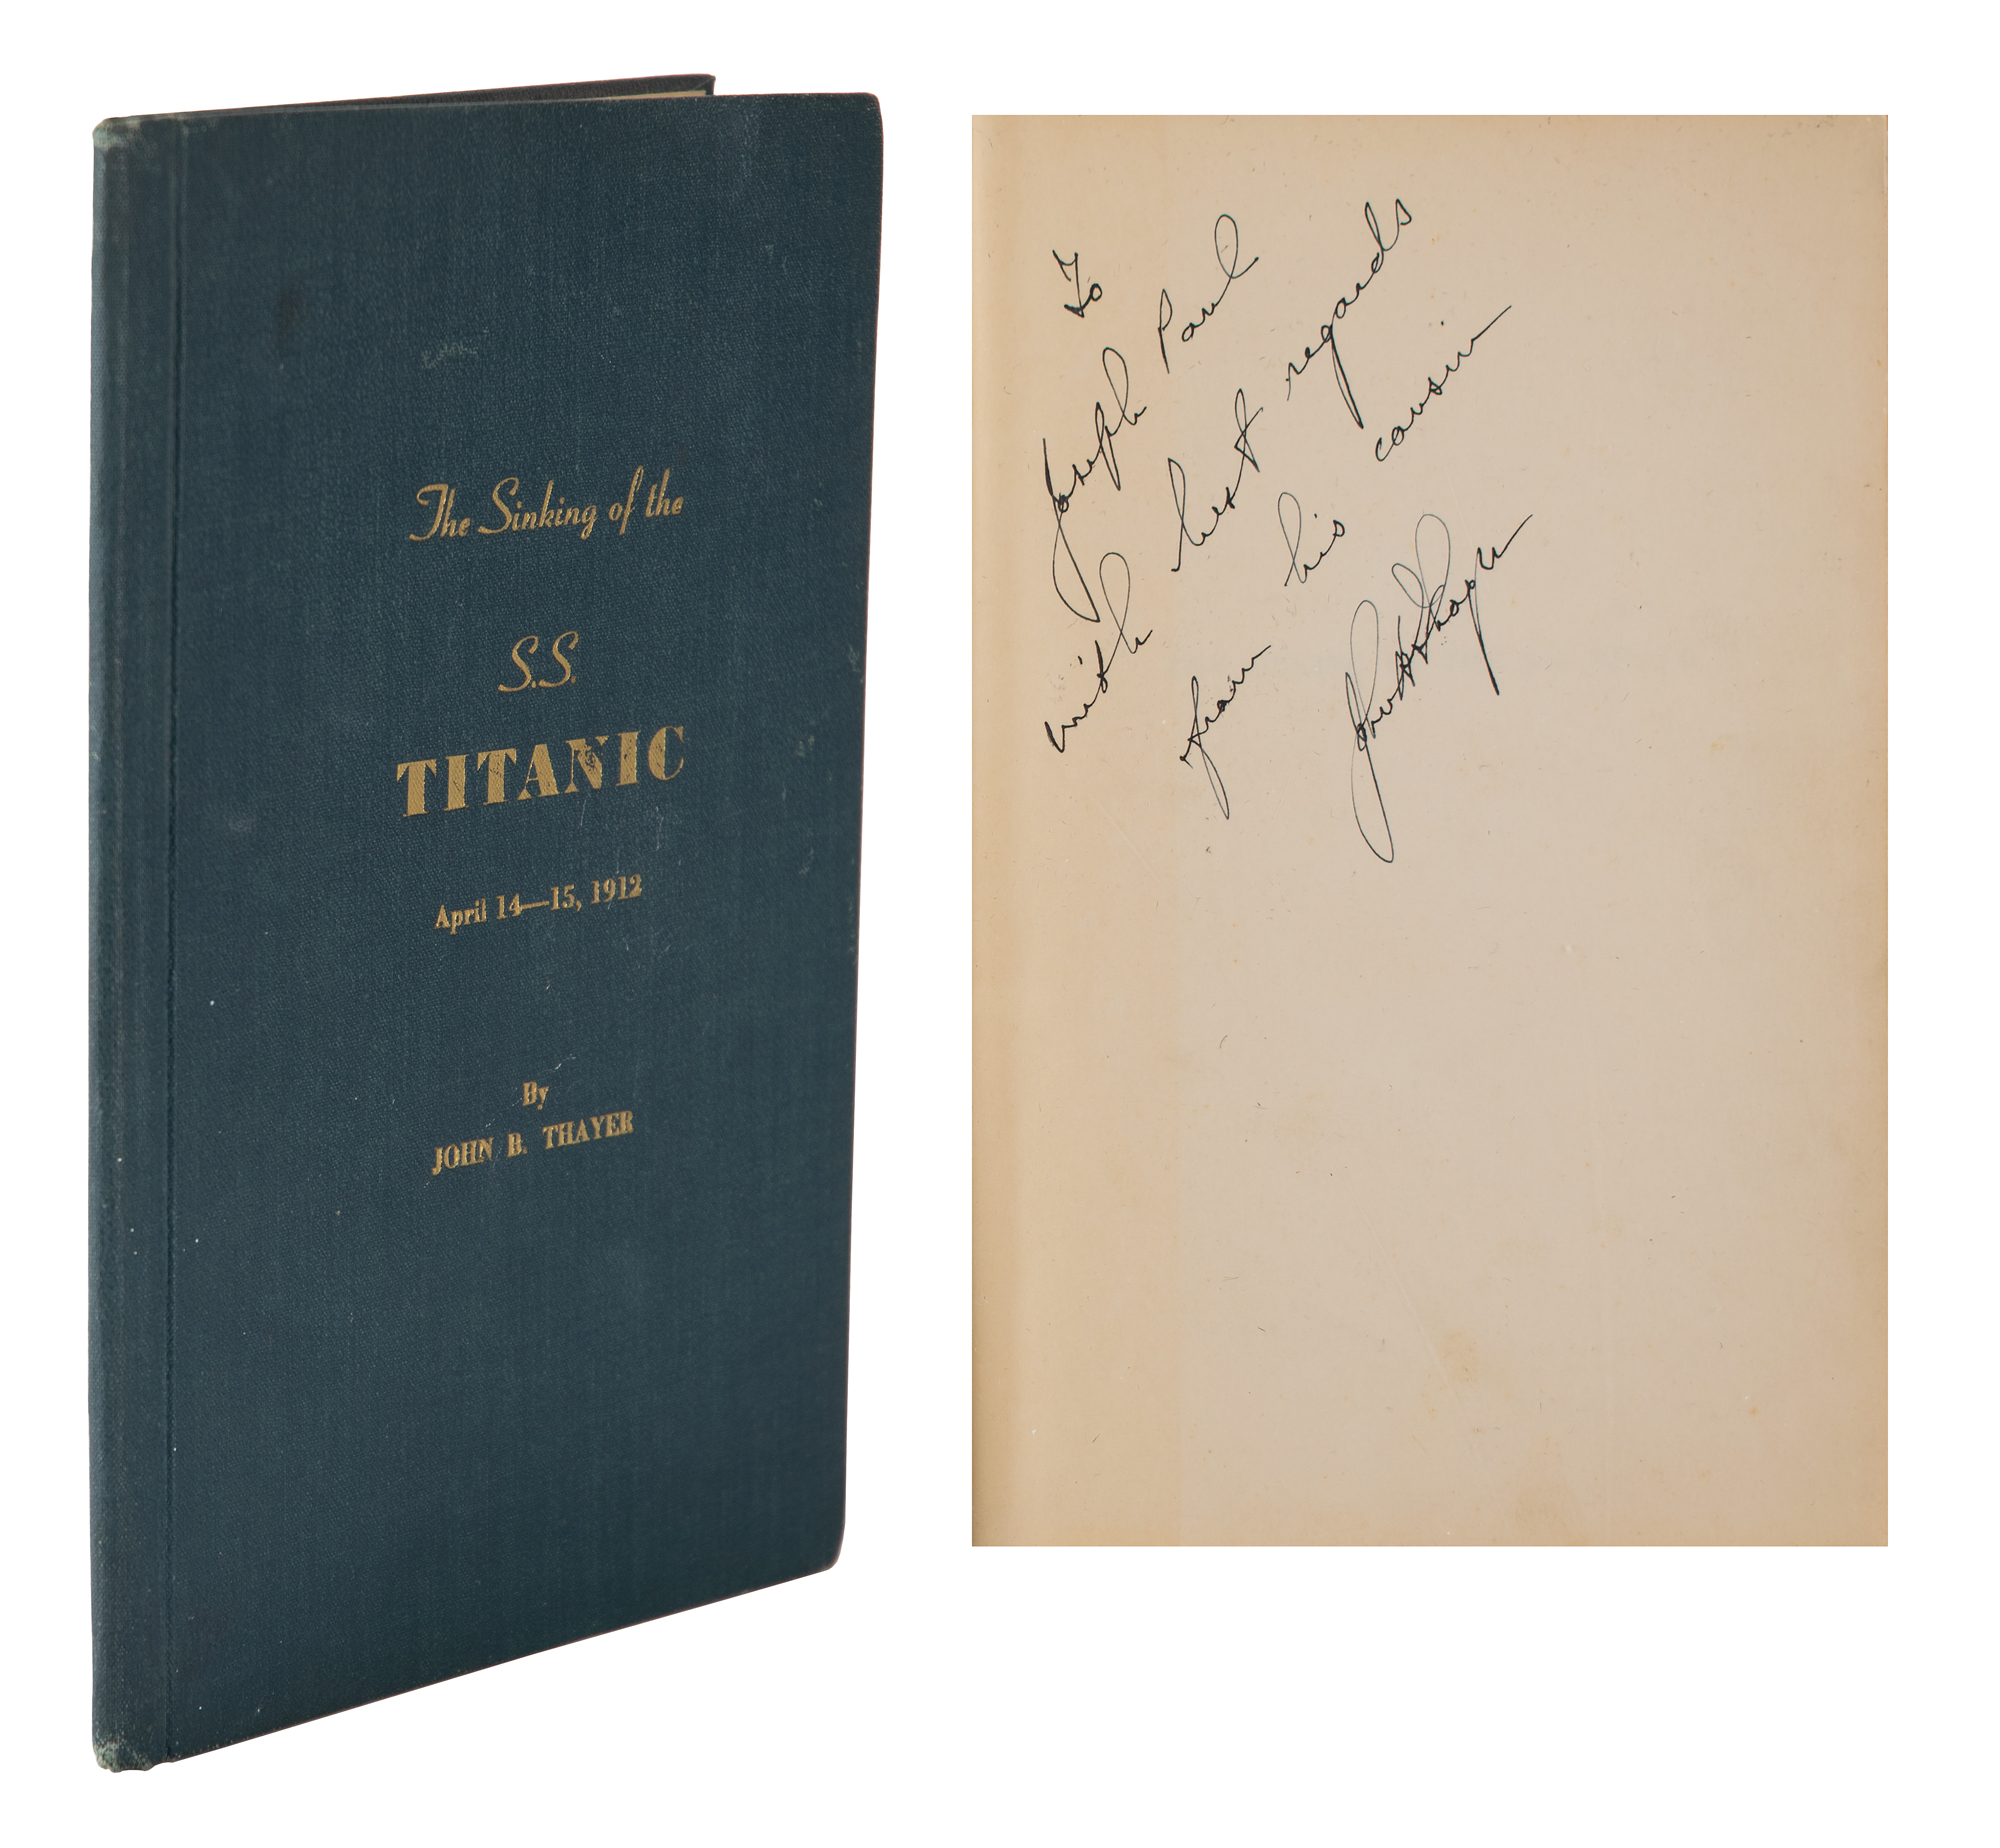 Lot #324 Titanic: Margaret and John Thayer (2) Marconigrams and Signed Book